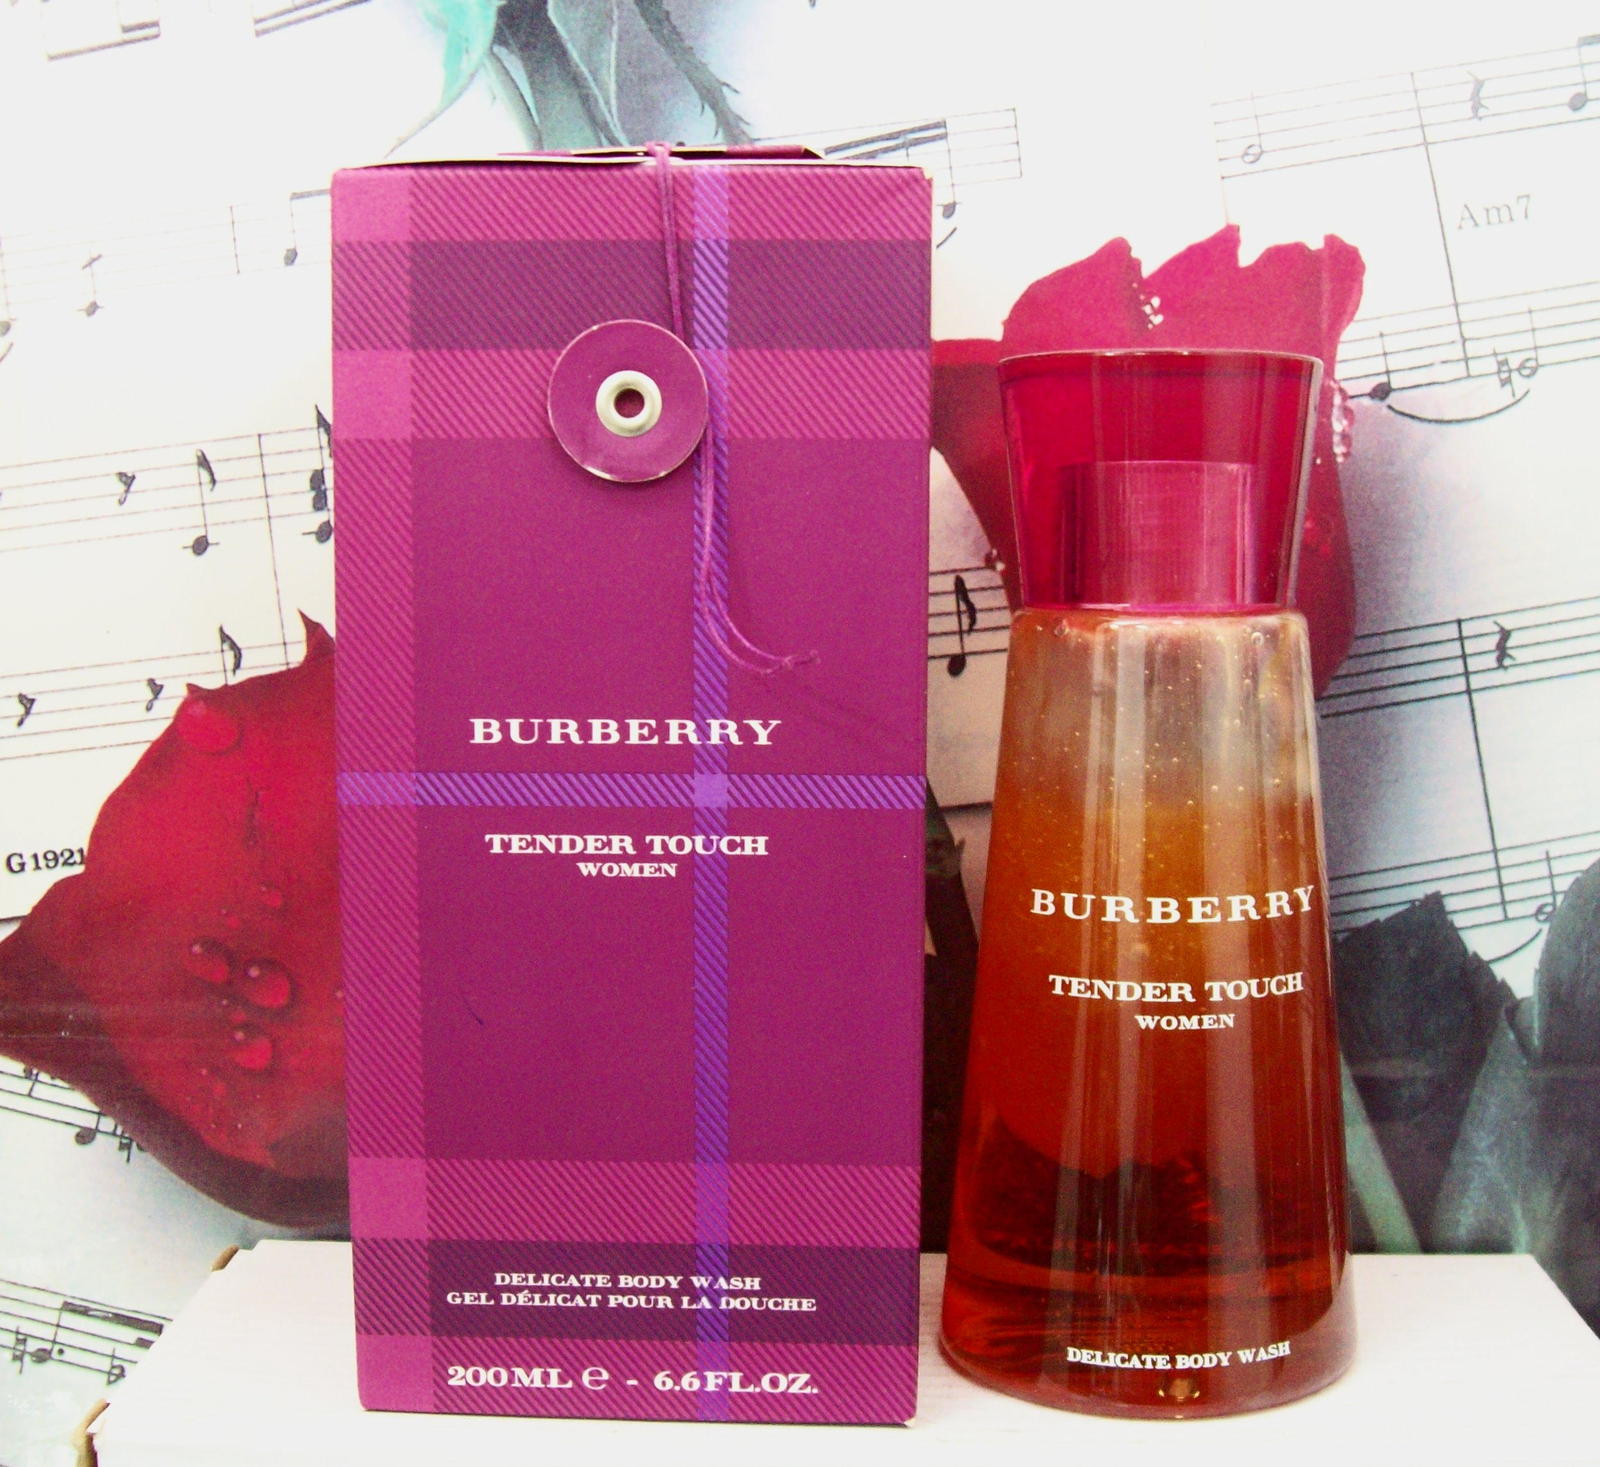 Burberry Tender Touch Shower Gel 6.6 FL. OZ. and 50 similar items